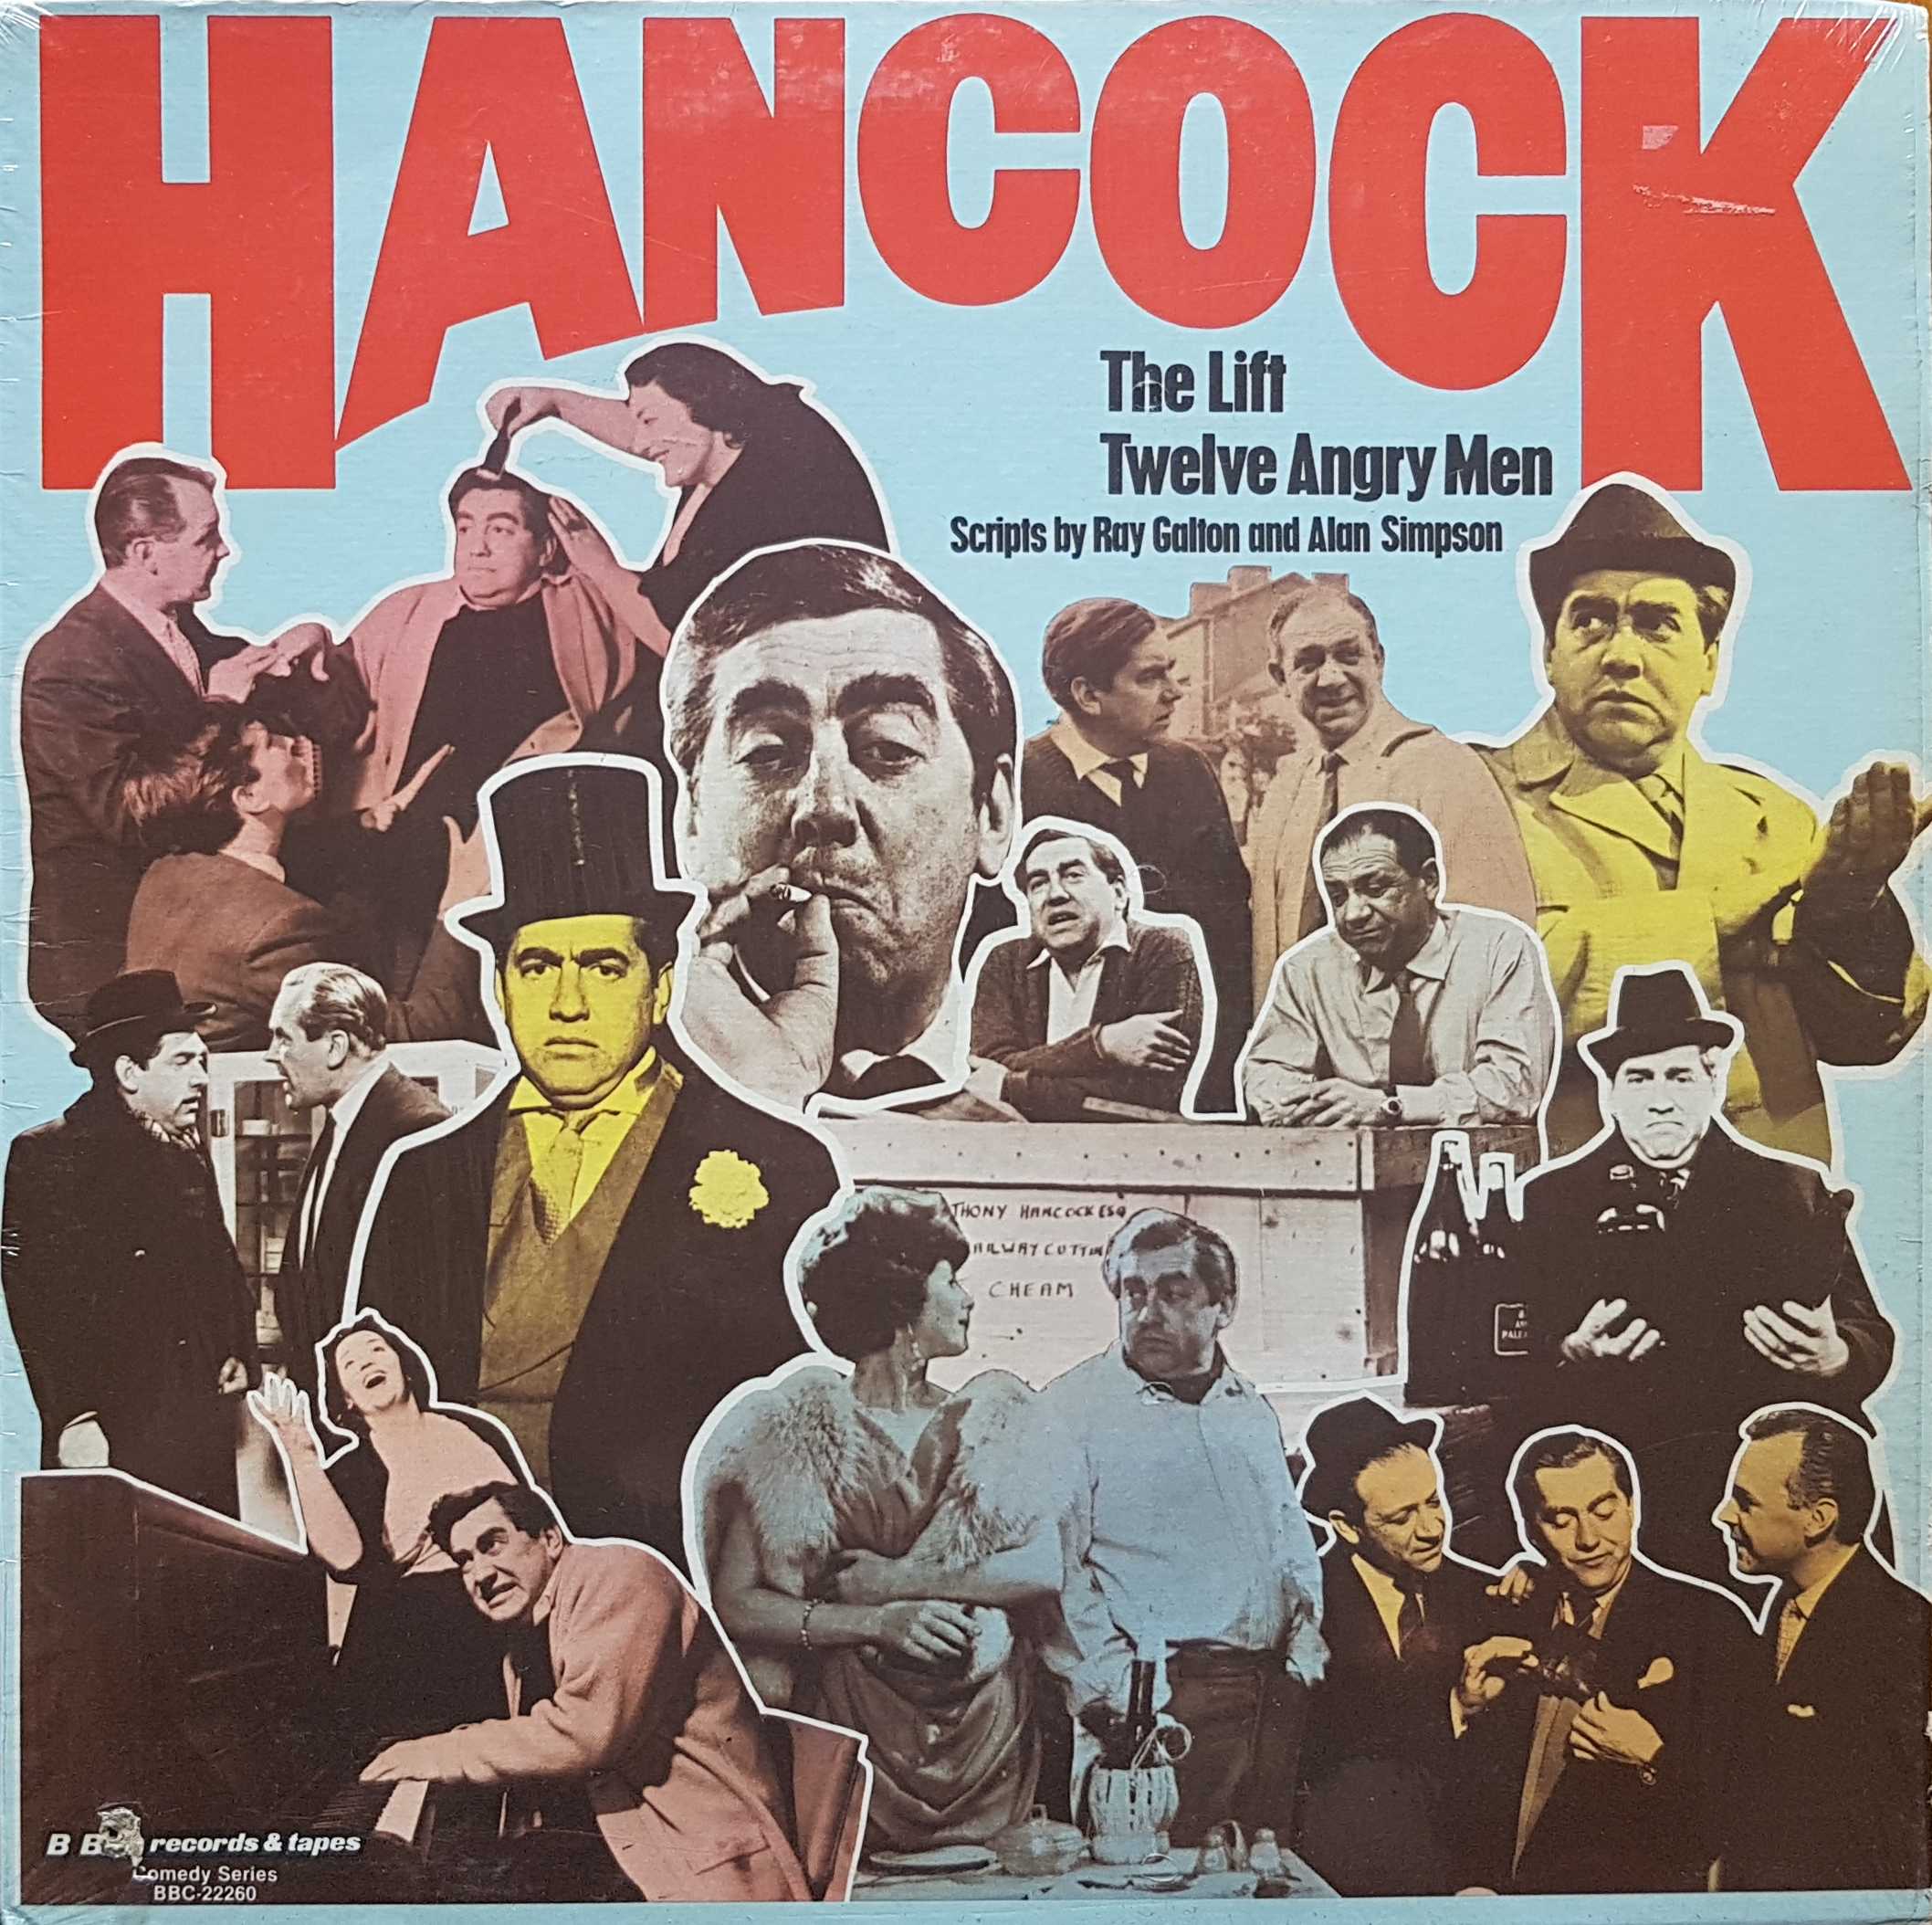 Picture of BBC - 22260 Hancock: The lift / Twelve angry men by artist Ray Galton / Alan Simpson from the BBC albums - Records and Tapes library